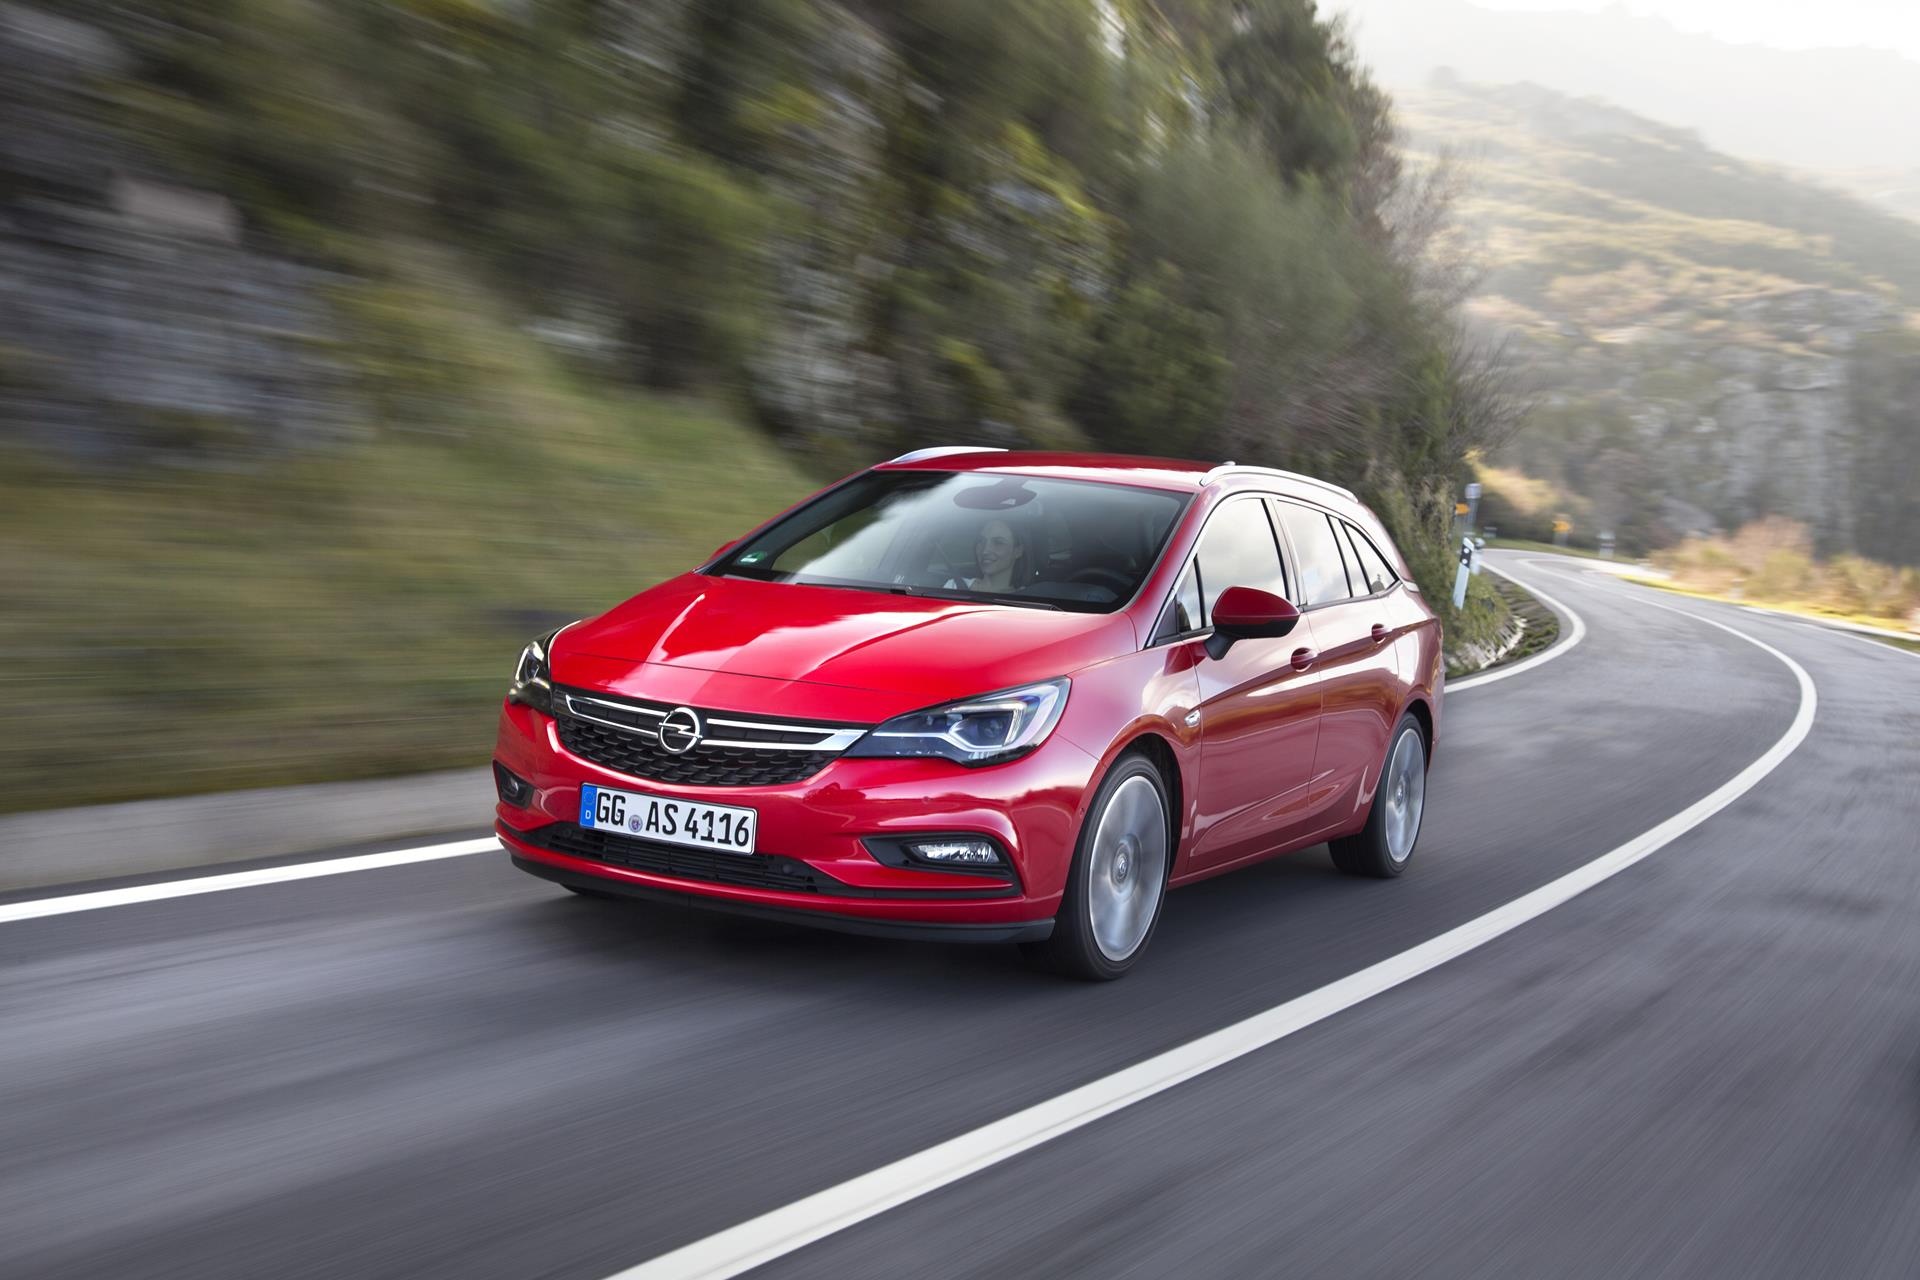 Opel Astra Sports Tourer, News and information, Highly anticipated, Automotive industry, 1920x1280 HD Desktop